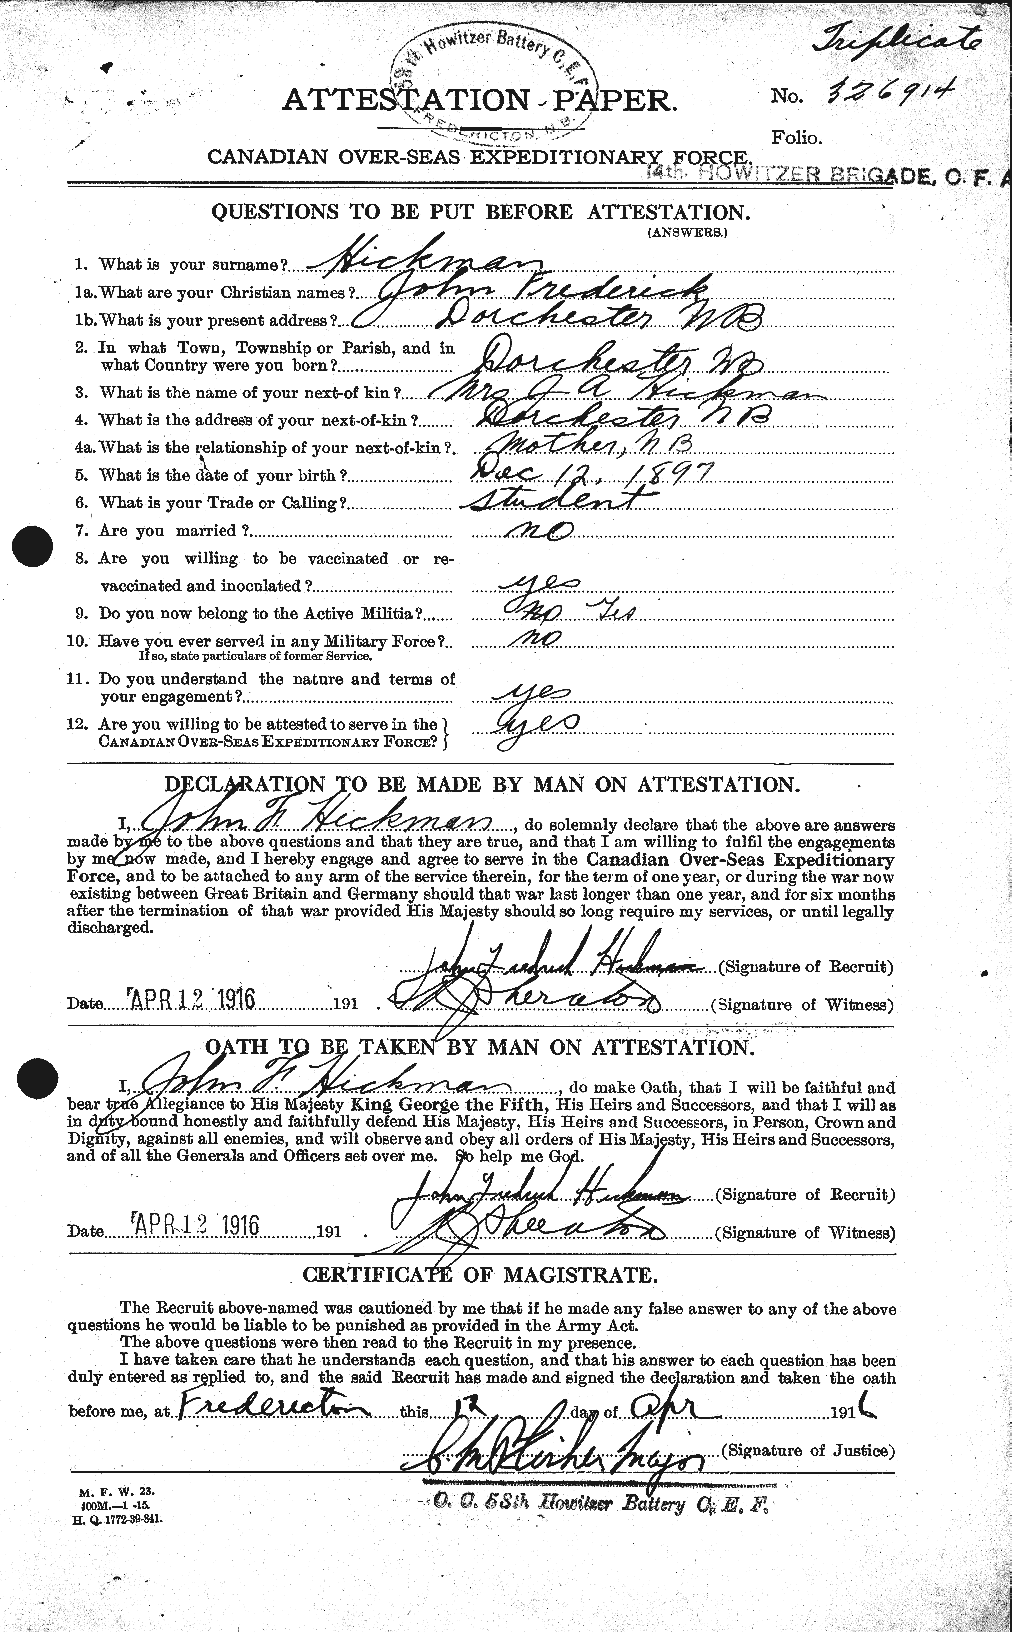 Personnel Records of the First World War - CEF 390989a